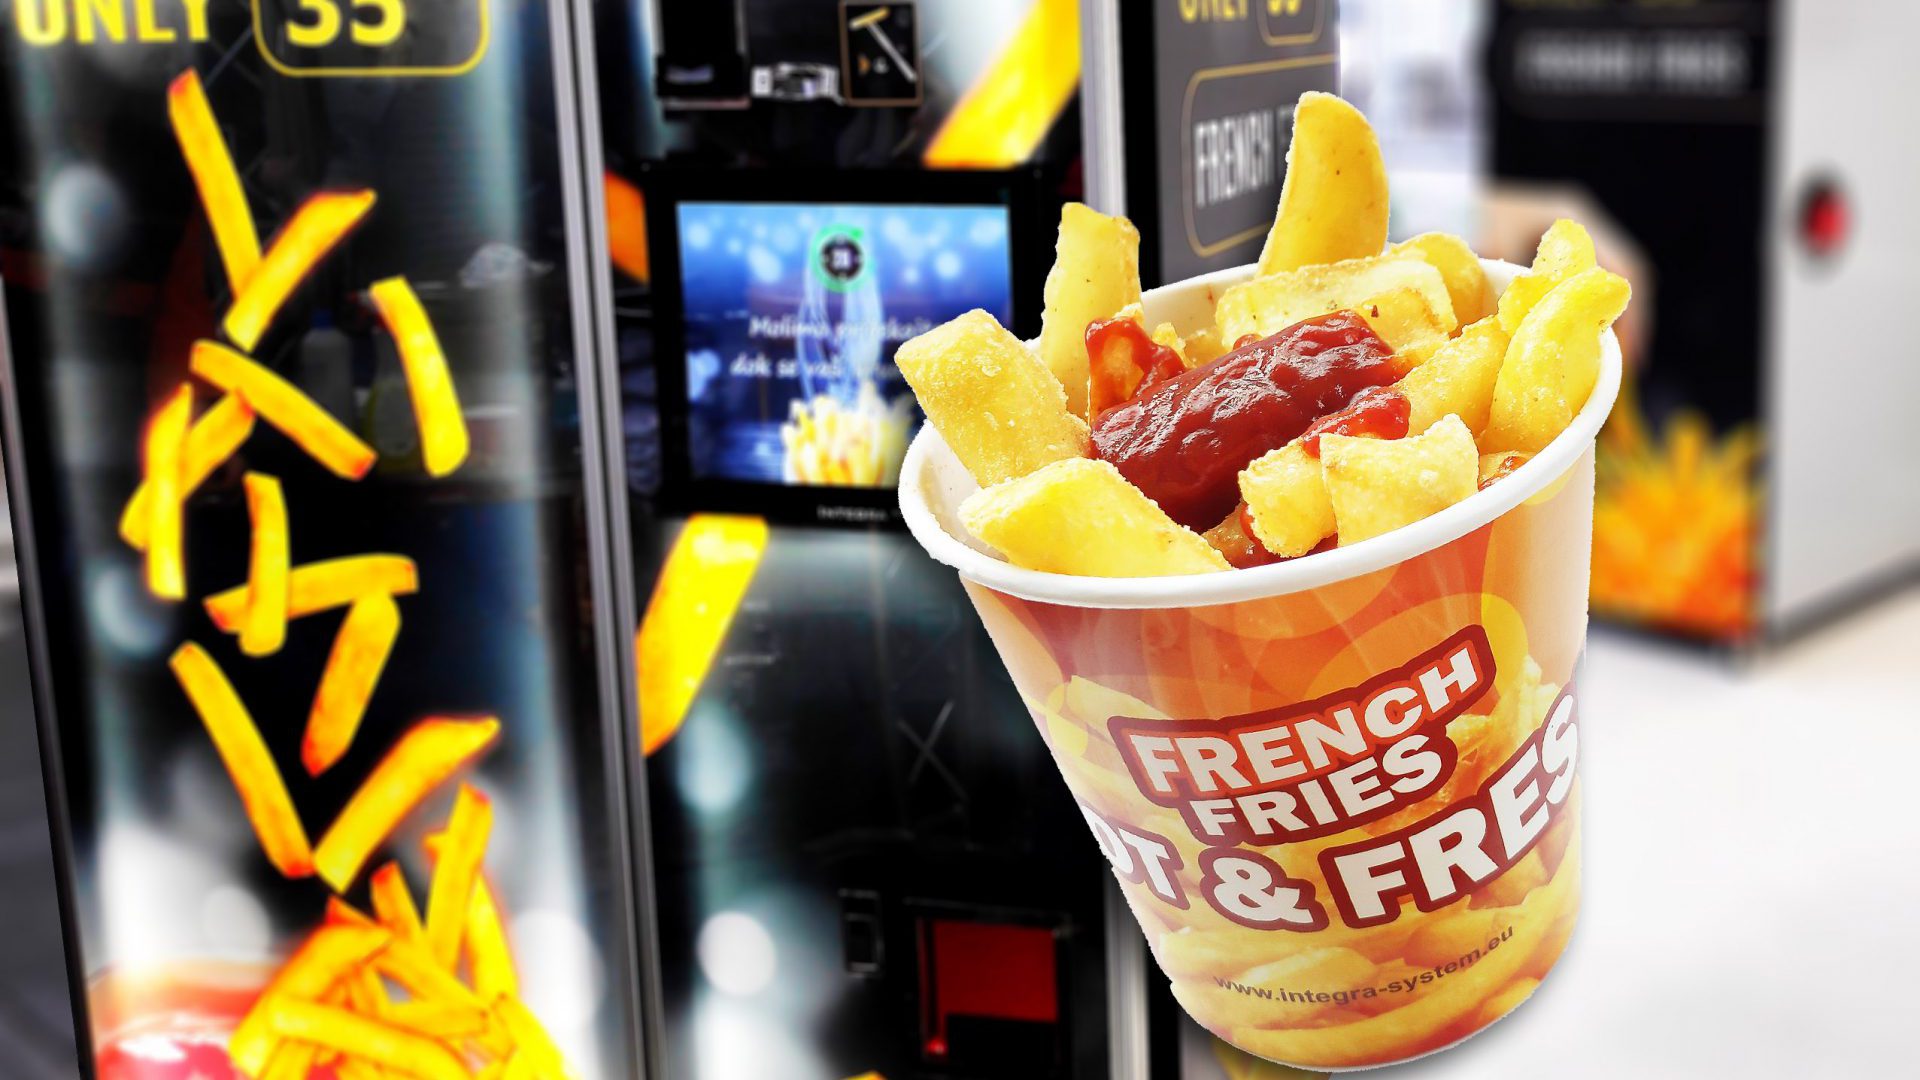 Integra Saratoga machine produces tasty and crispy French fries in 35 seconds!